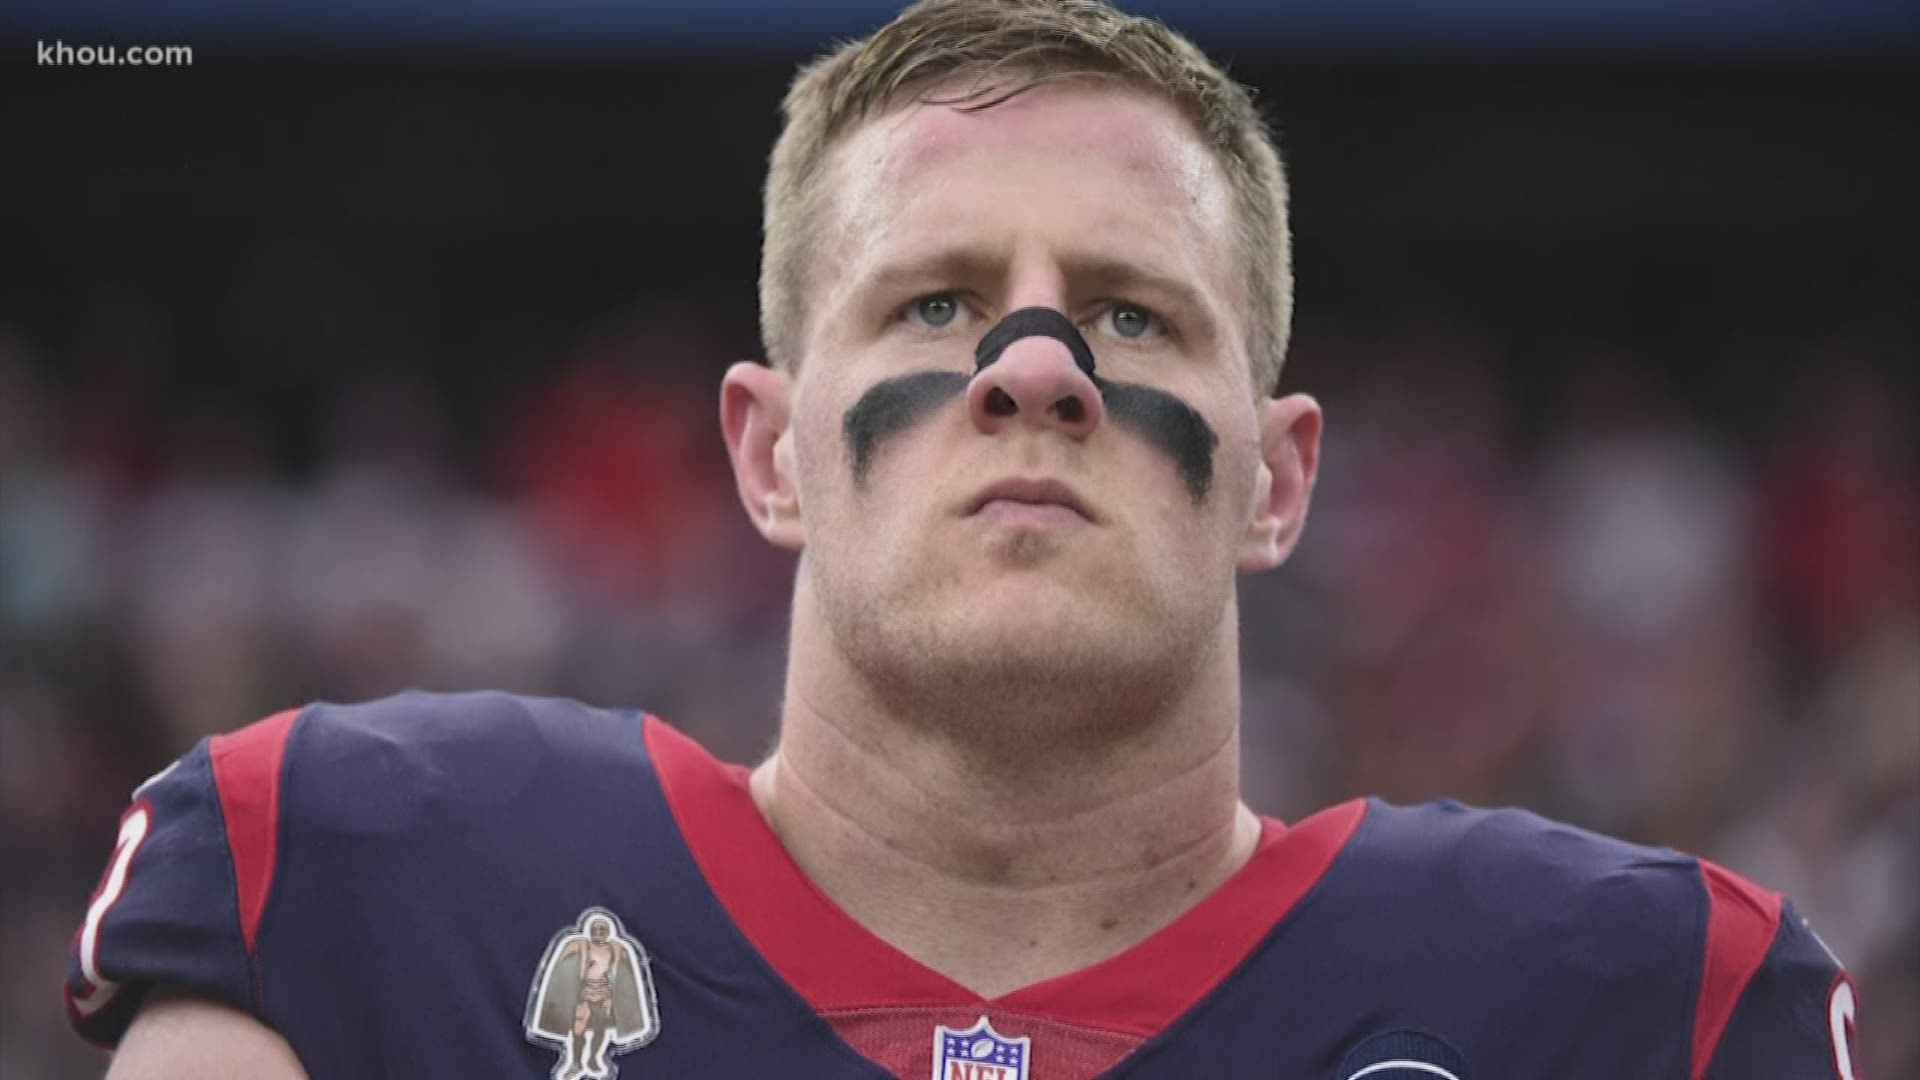 Houston Texans star J.J. Watt donated $10,000 to the family of a Wisconsin firefighter who was killed by a gunman while on the job.